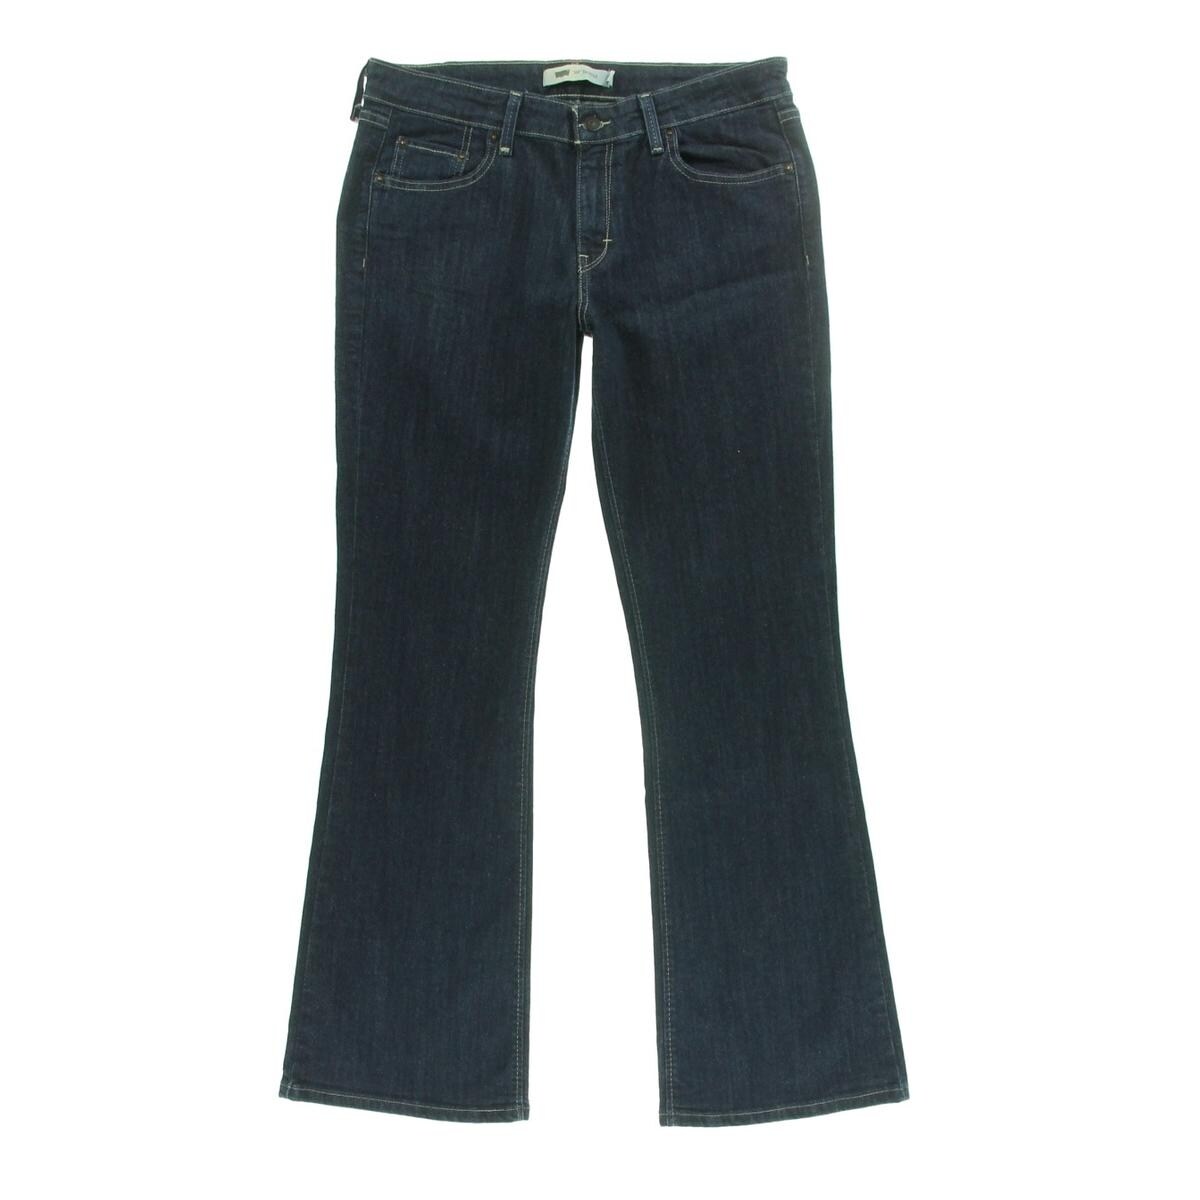 levi's 518 bootcut womens jeans